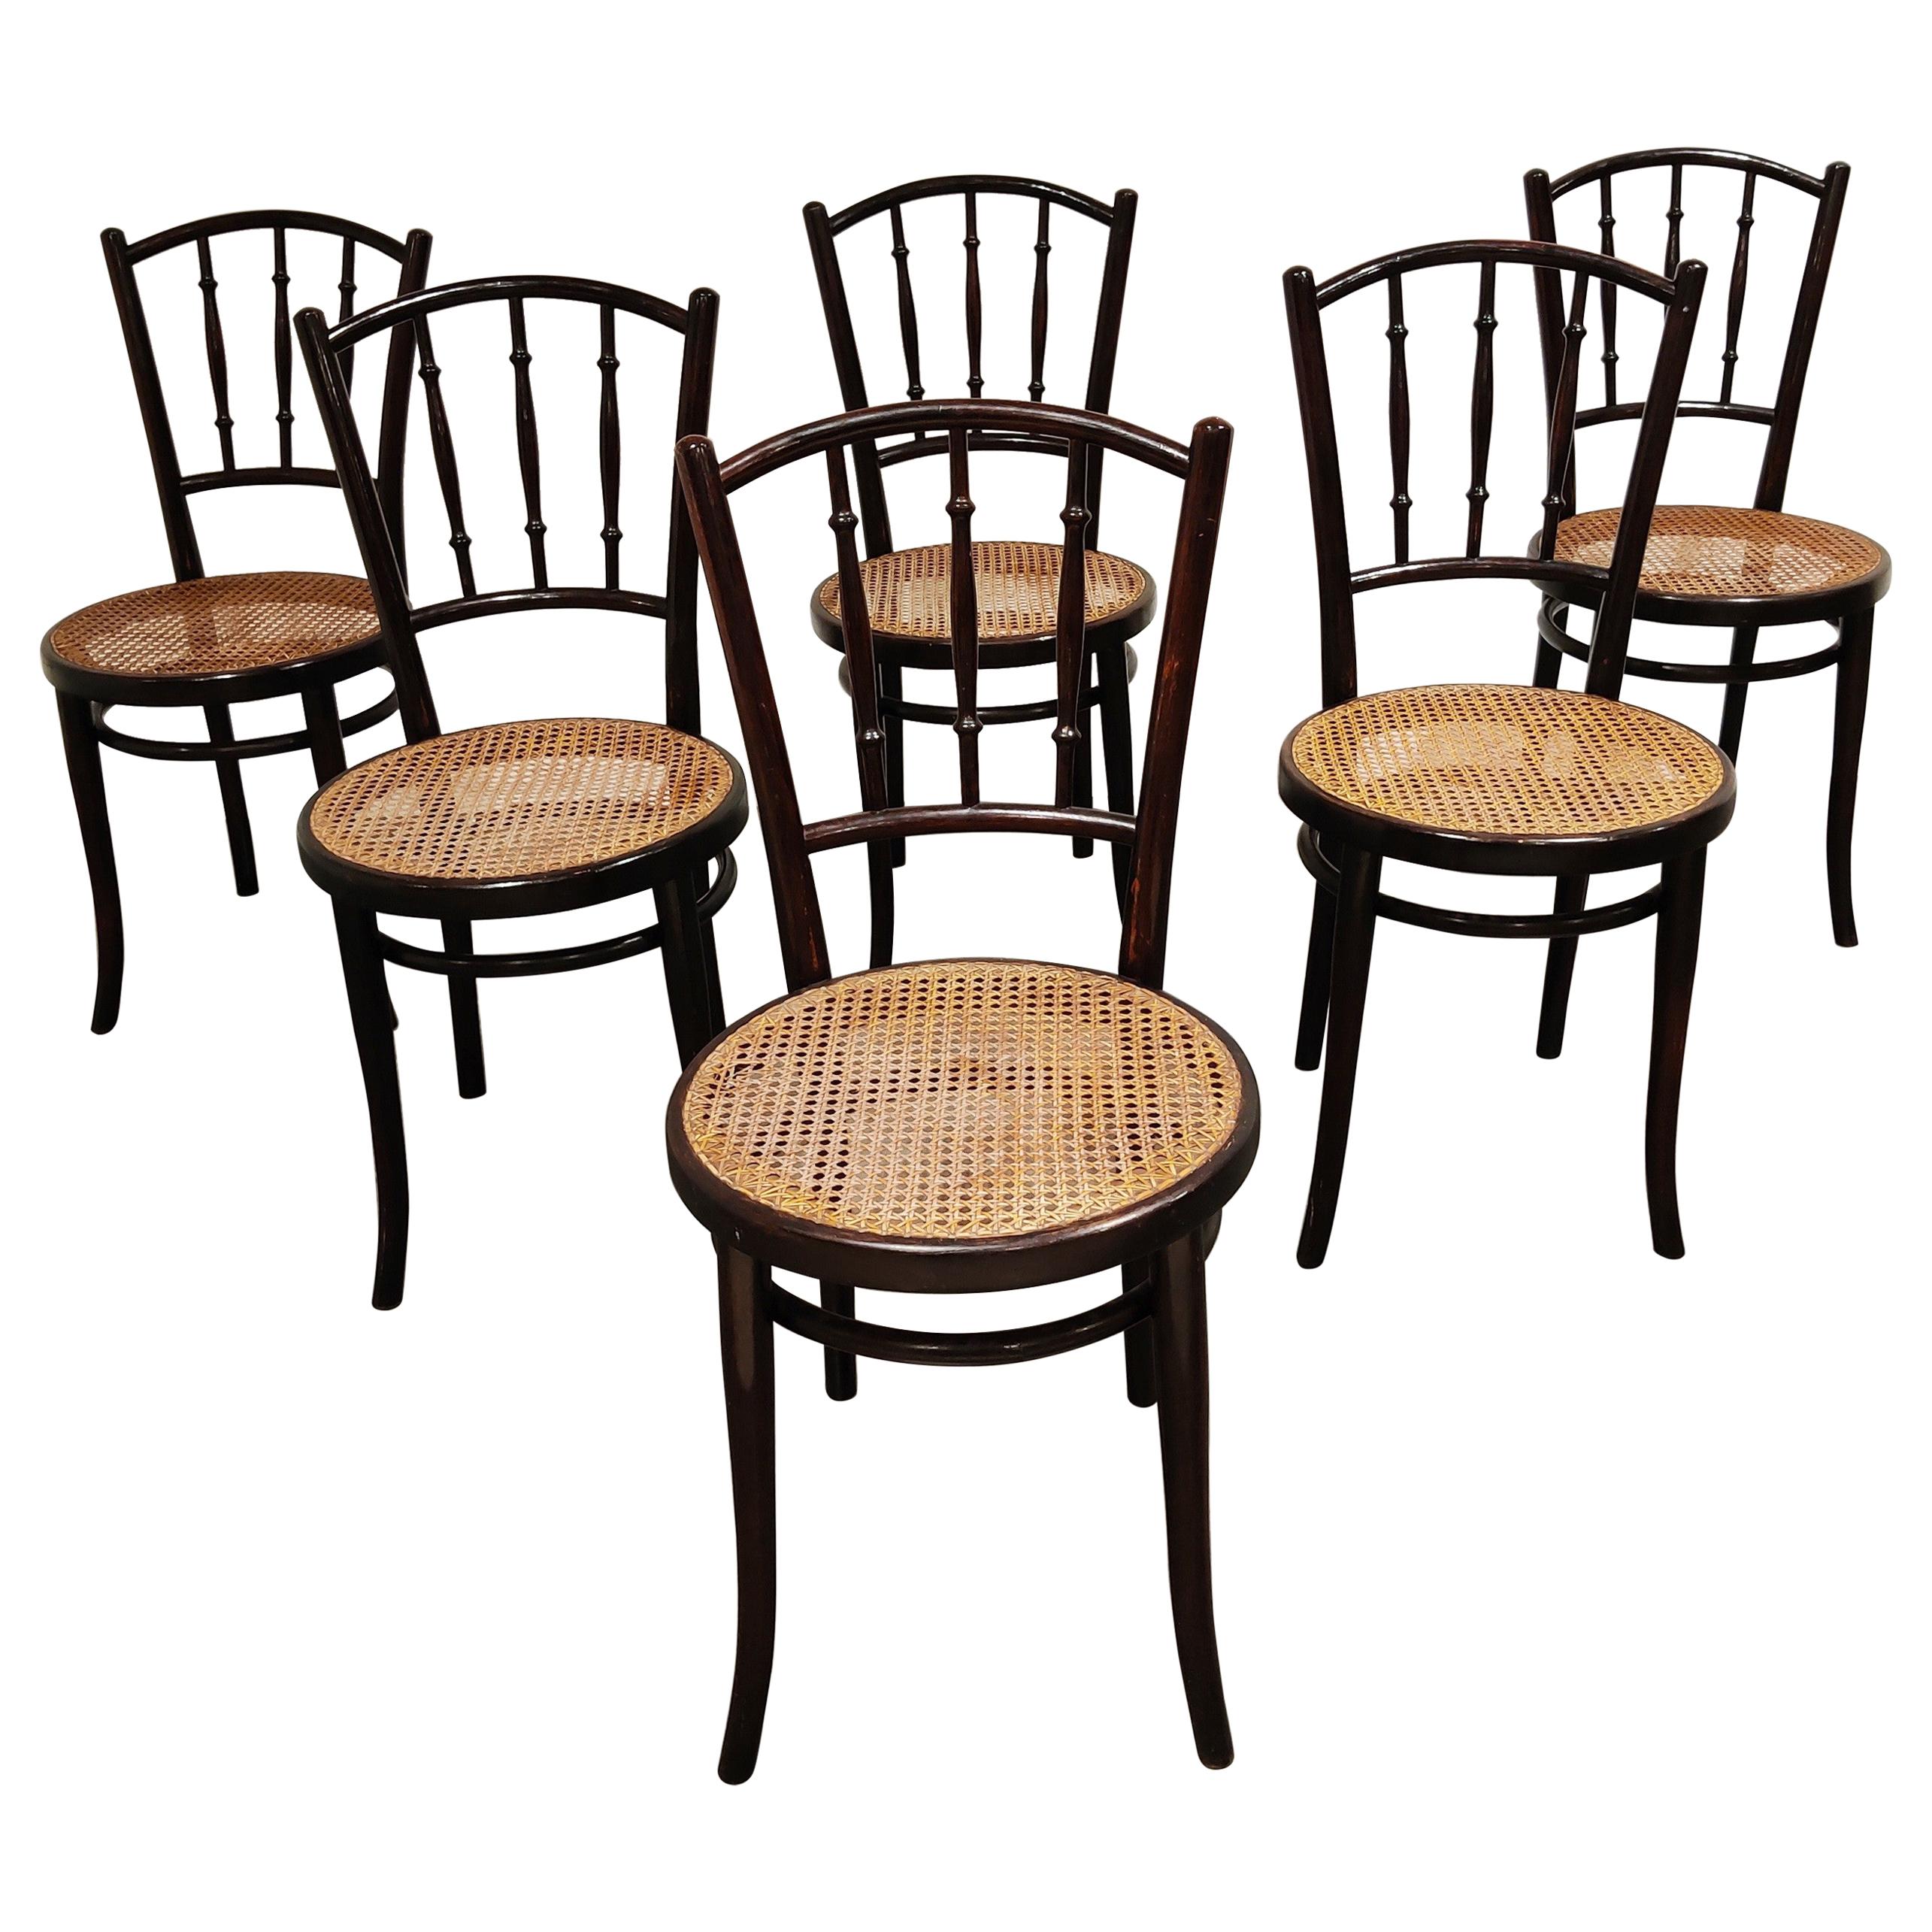 Set of 6 Bentwood Chairs by Thonet, 1920s, Austria